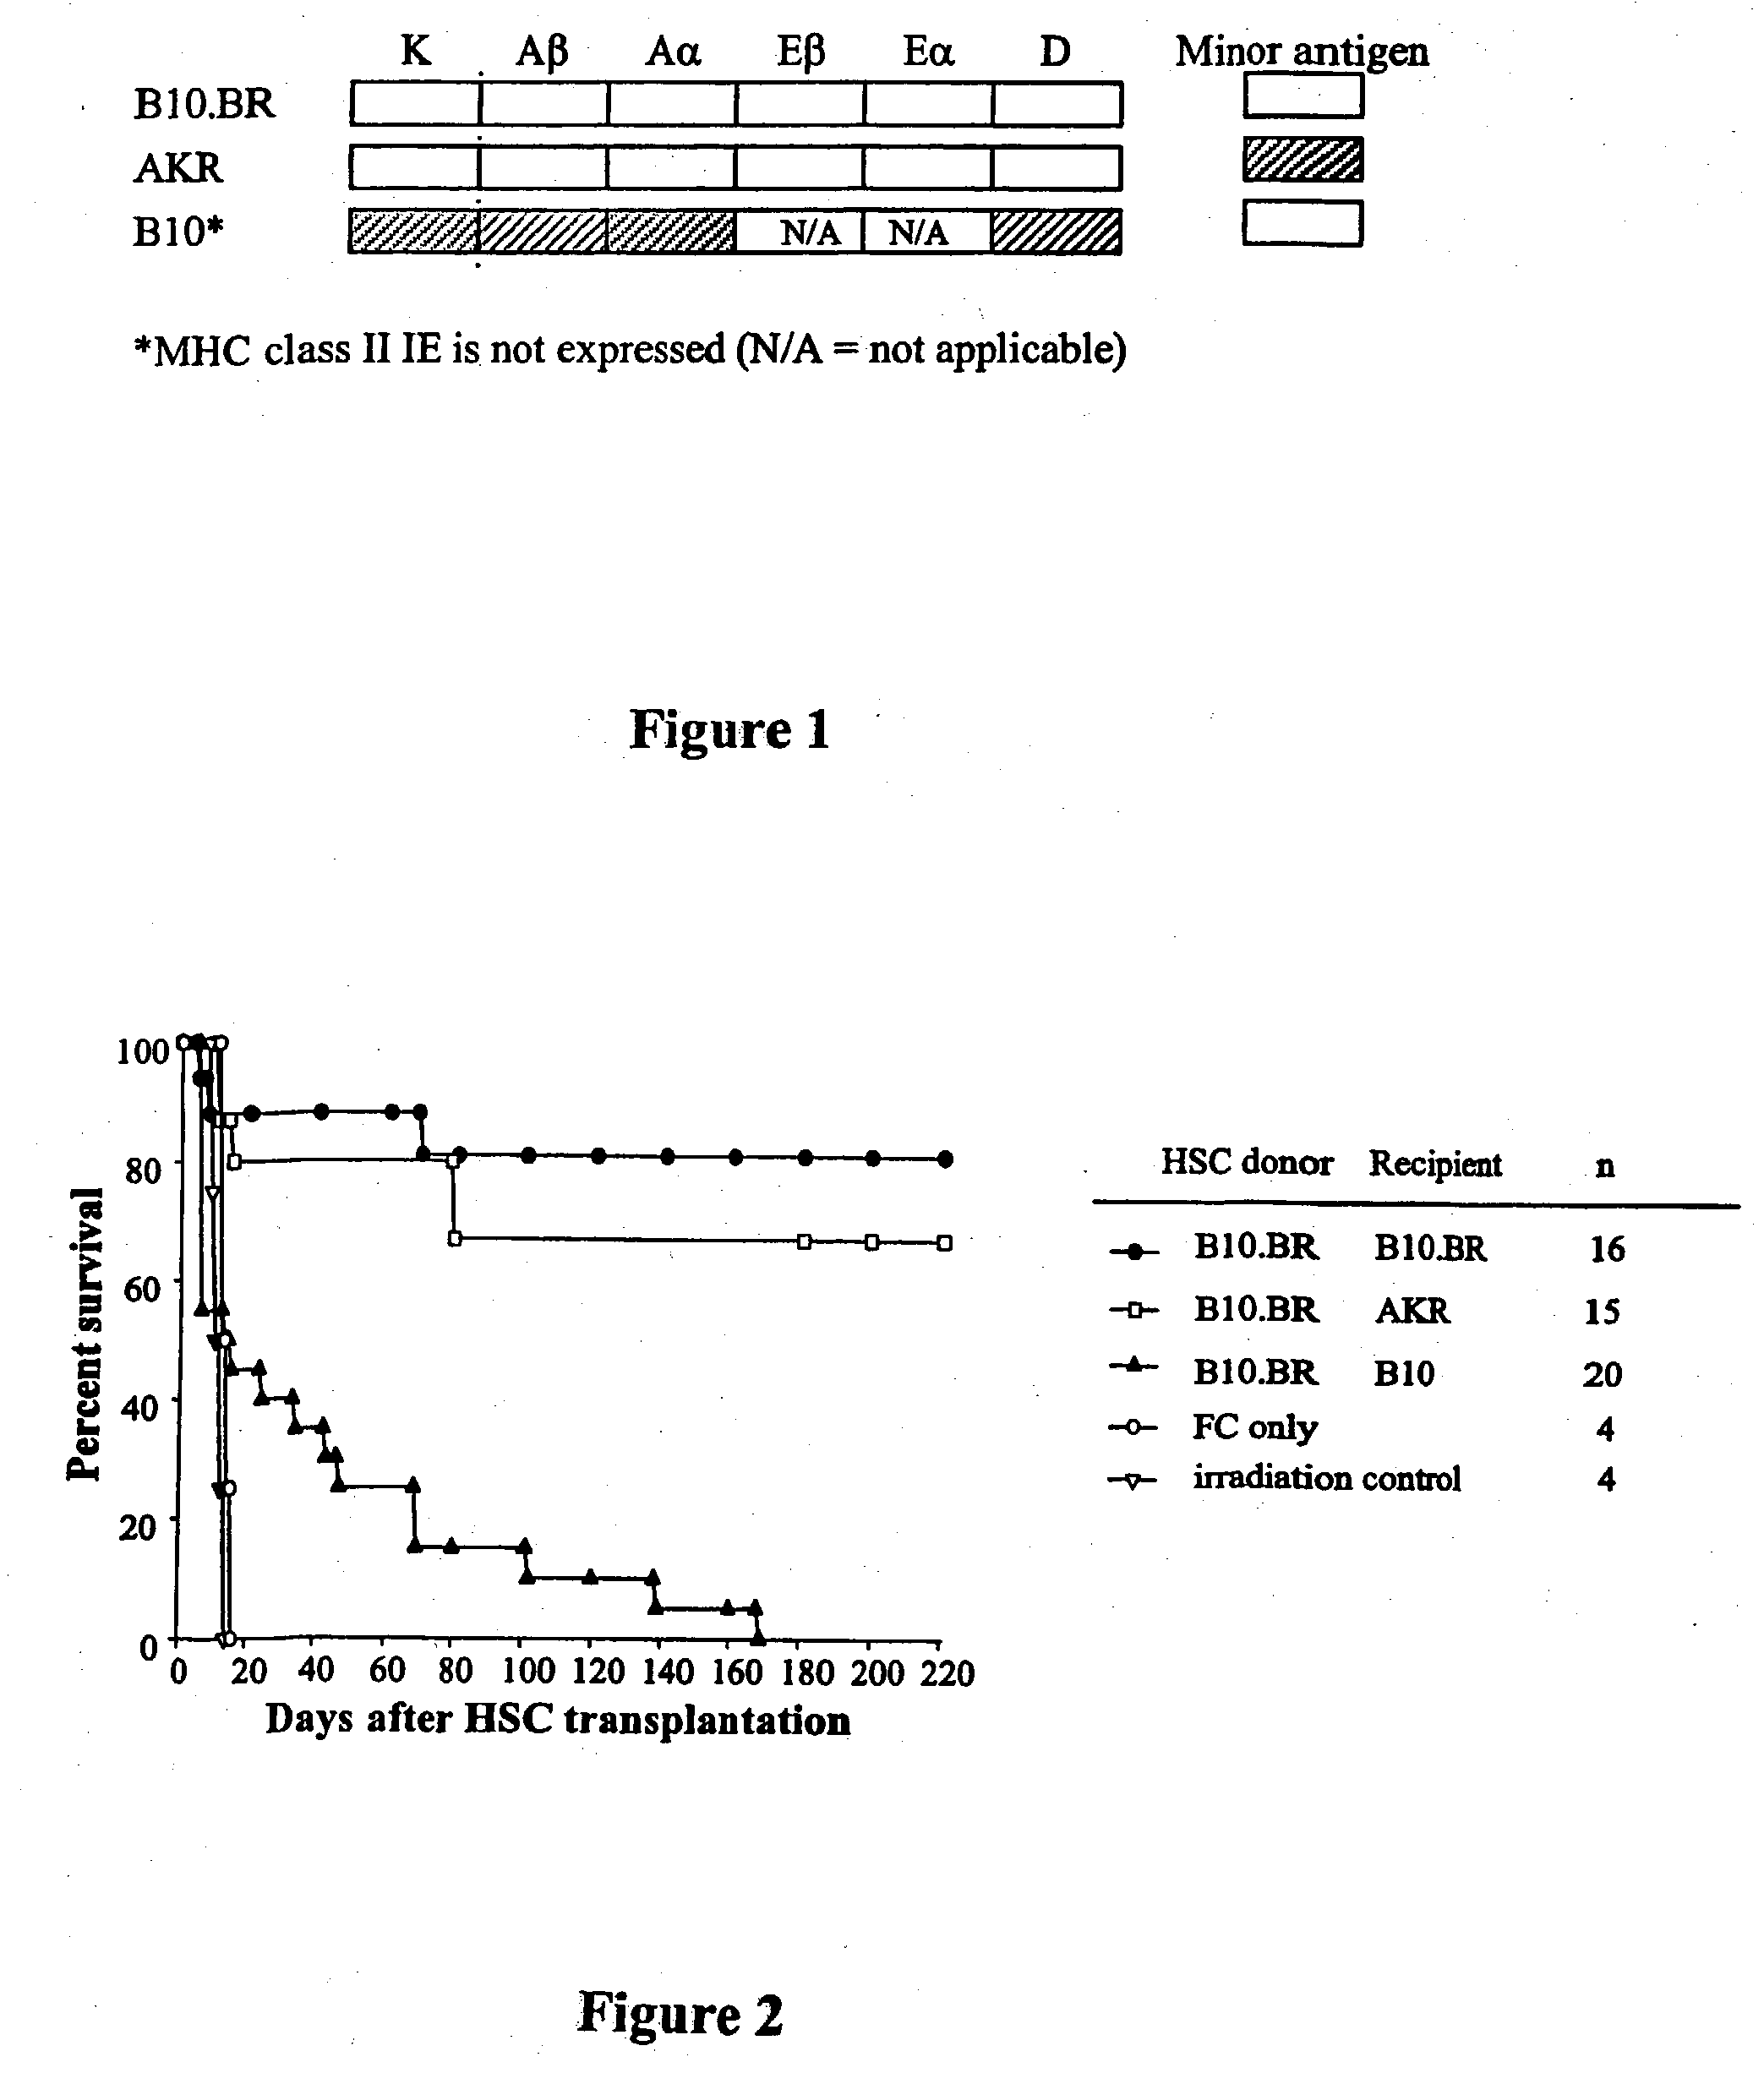 Methods for enhancing engraftment of purified hematopoietic stem cells in allogeneic recipients